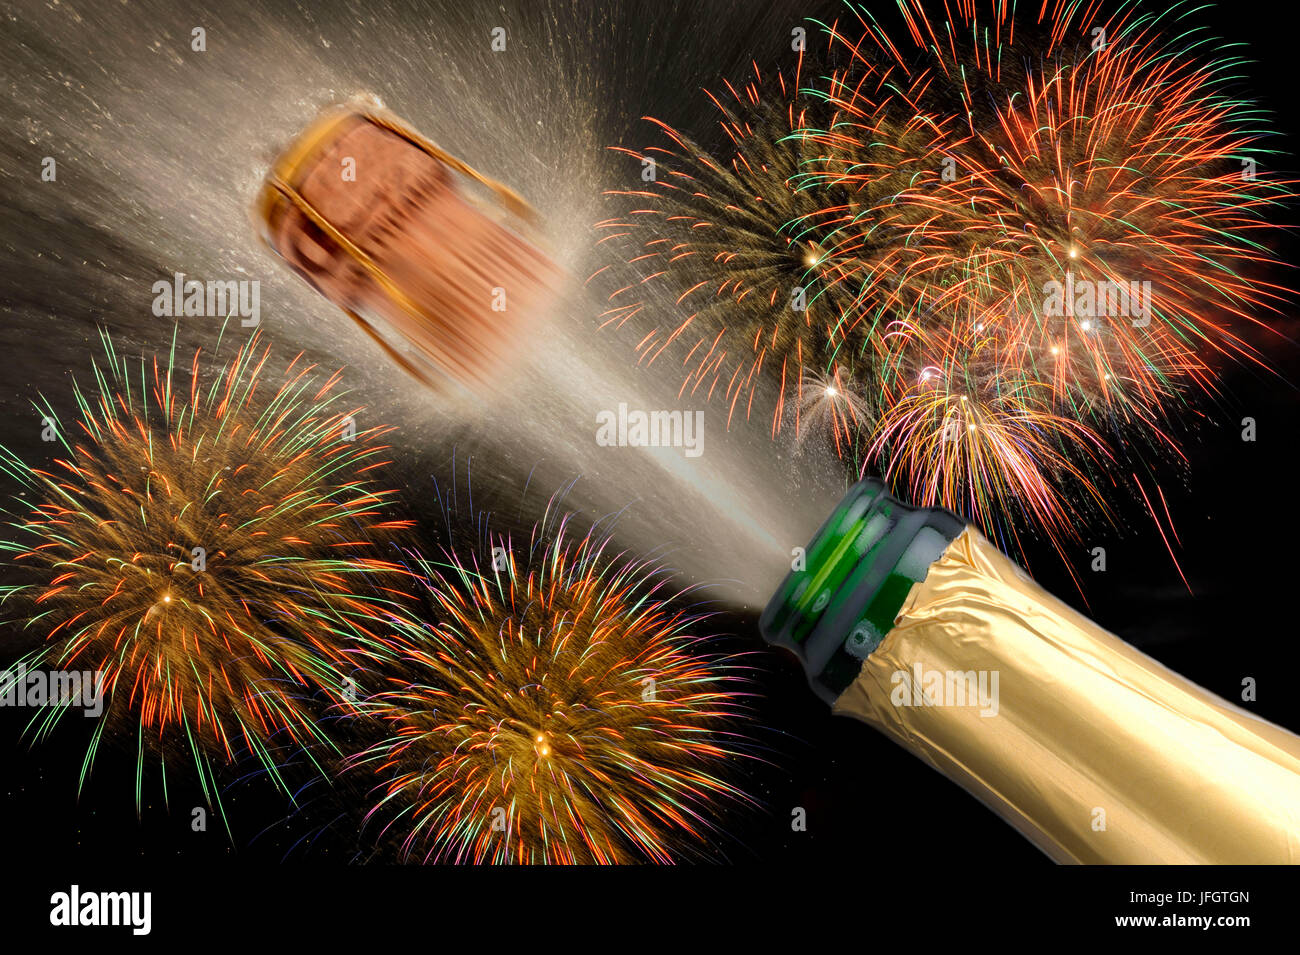 Fireworks and champagne bottle with belting cork Stock Photo